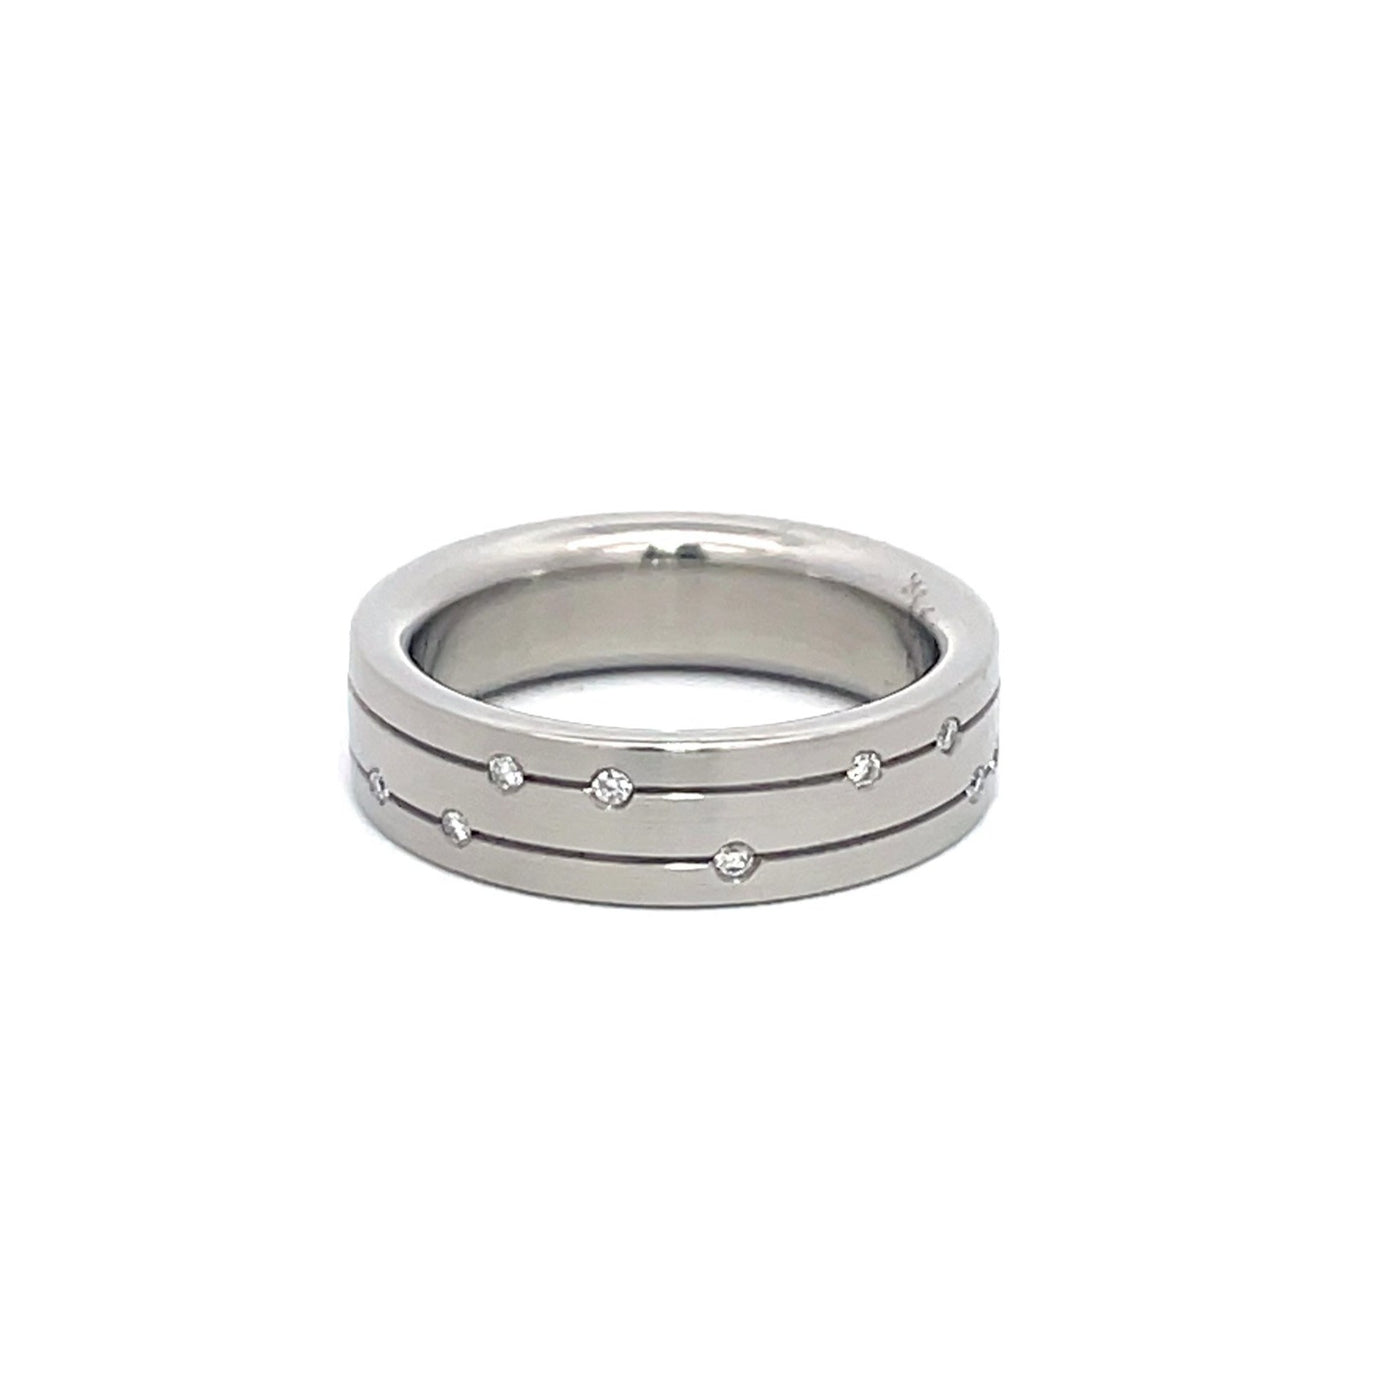 6mm Stainless Steel Incised Line Diamond Scatter Ring - Size N 1/2